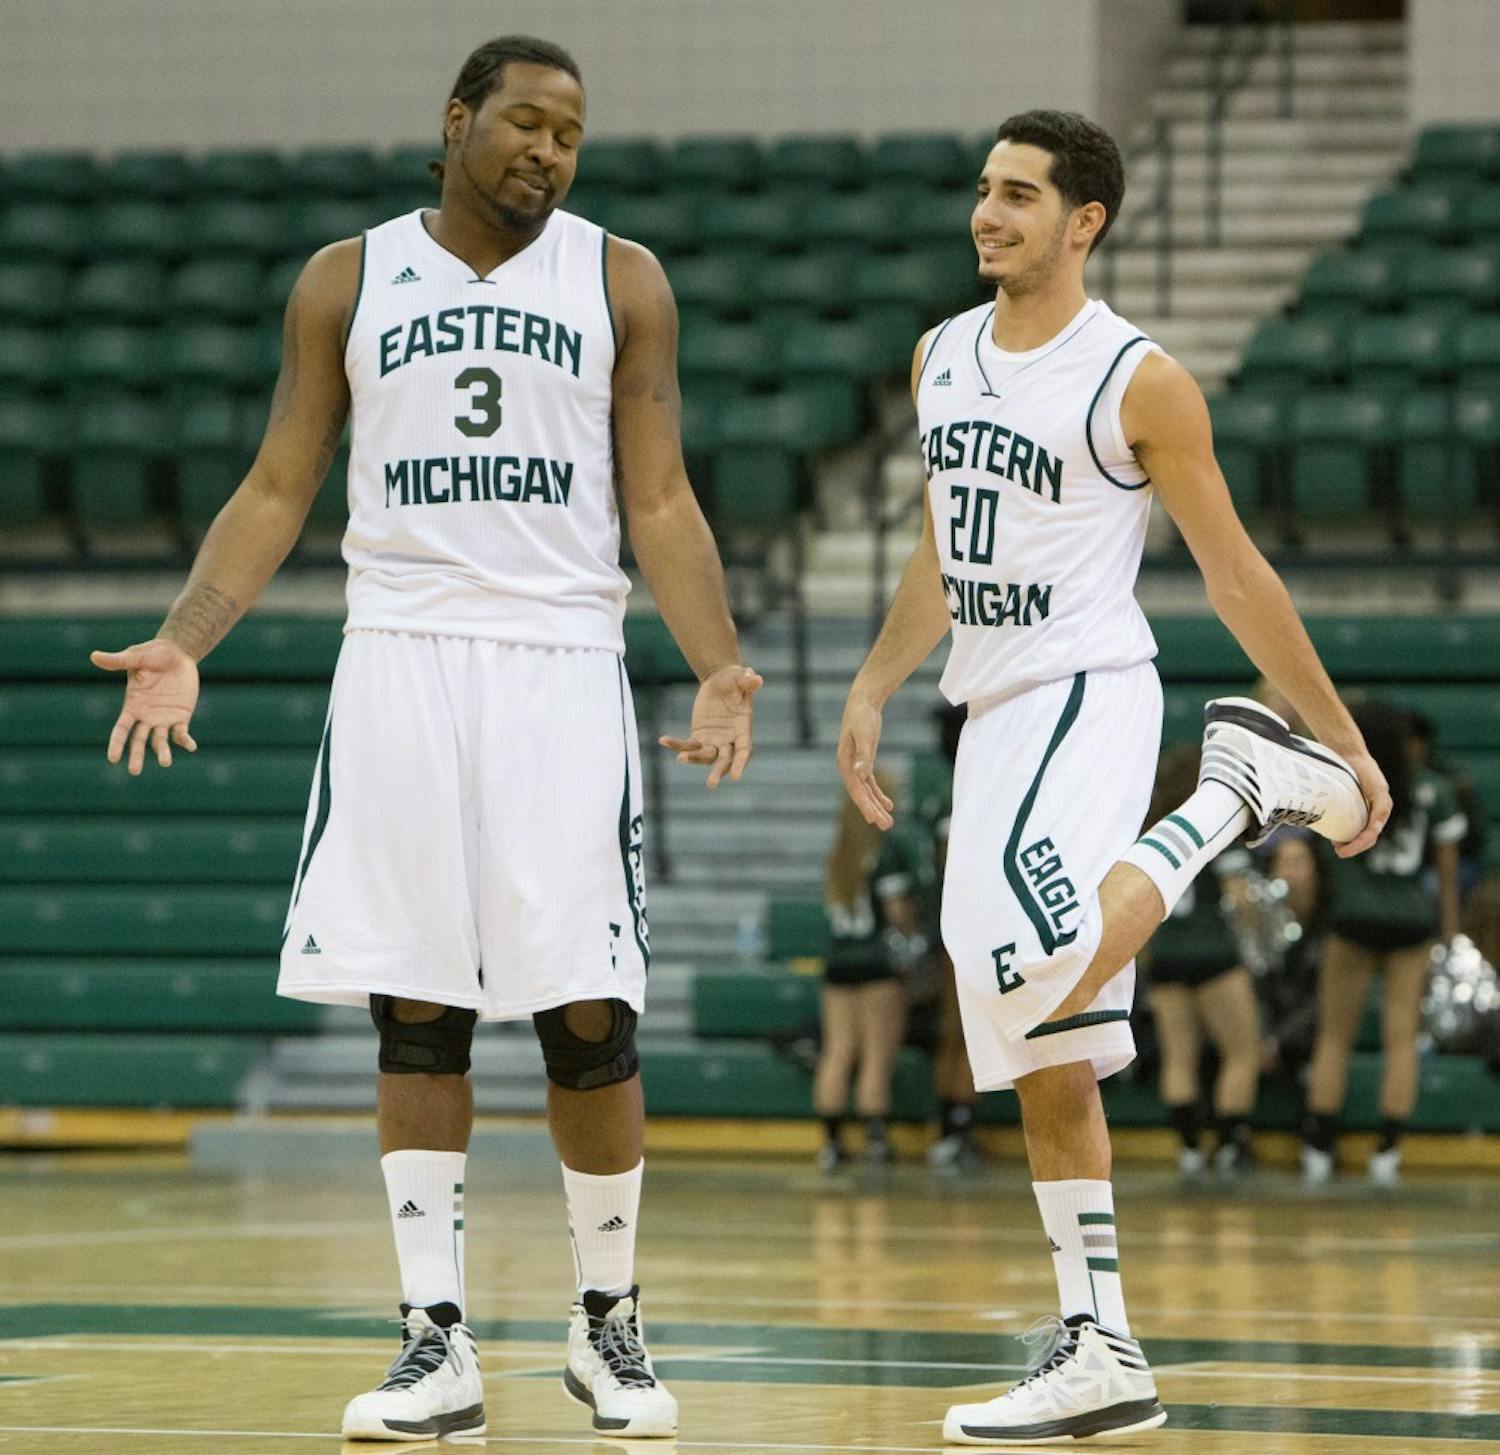 	Hughley (left) is averaging 1.3 points and 1.2 rebounds per game.